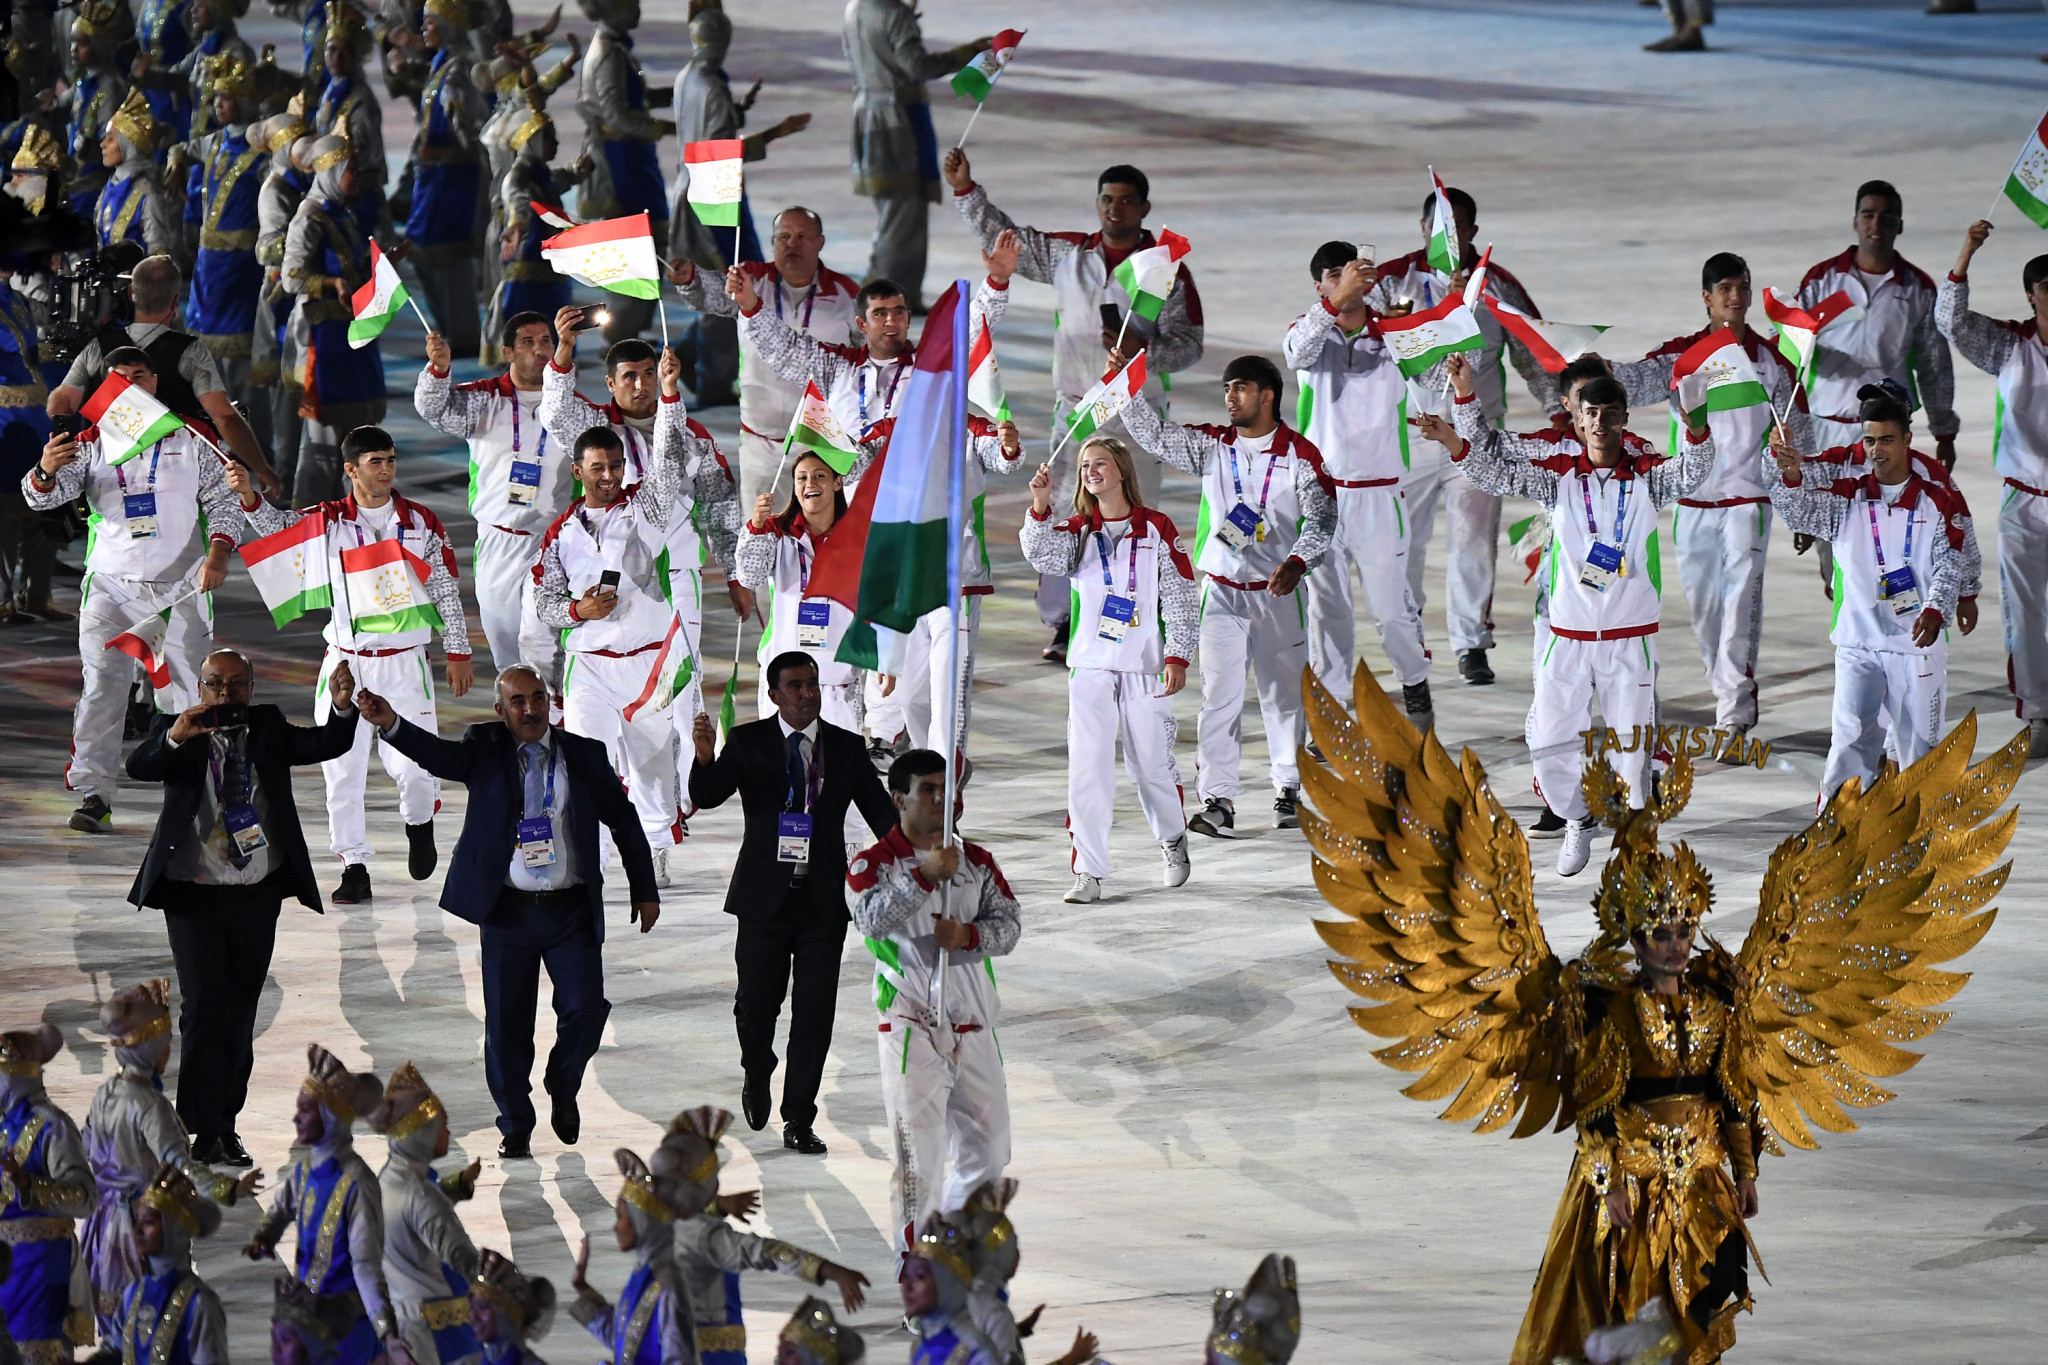 The National Olympic Committee of Tajikistan claim they will hold 1,200 seminars to increase awareness among athletes ©Getty Images